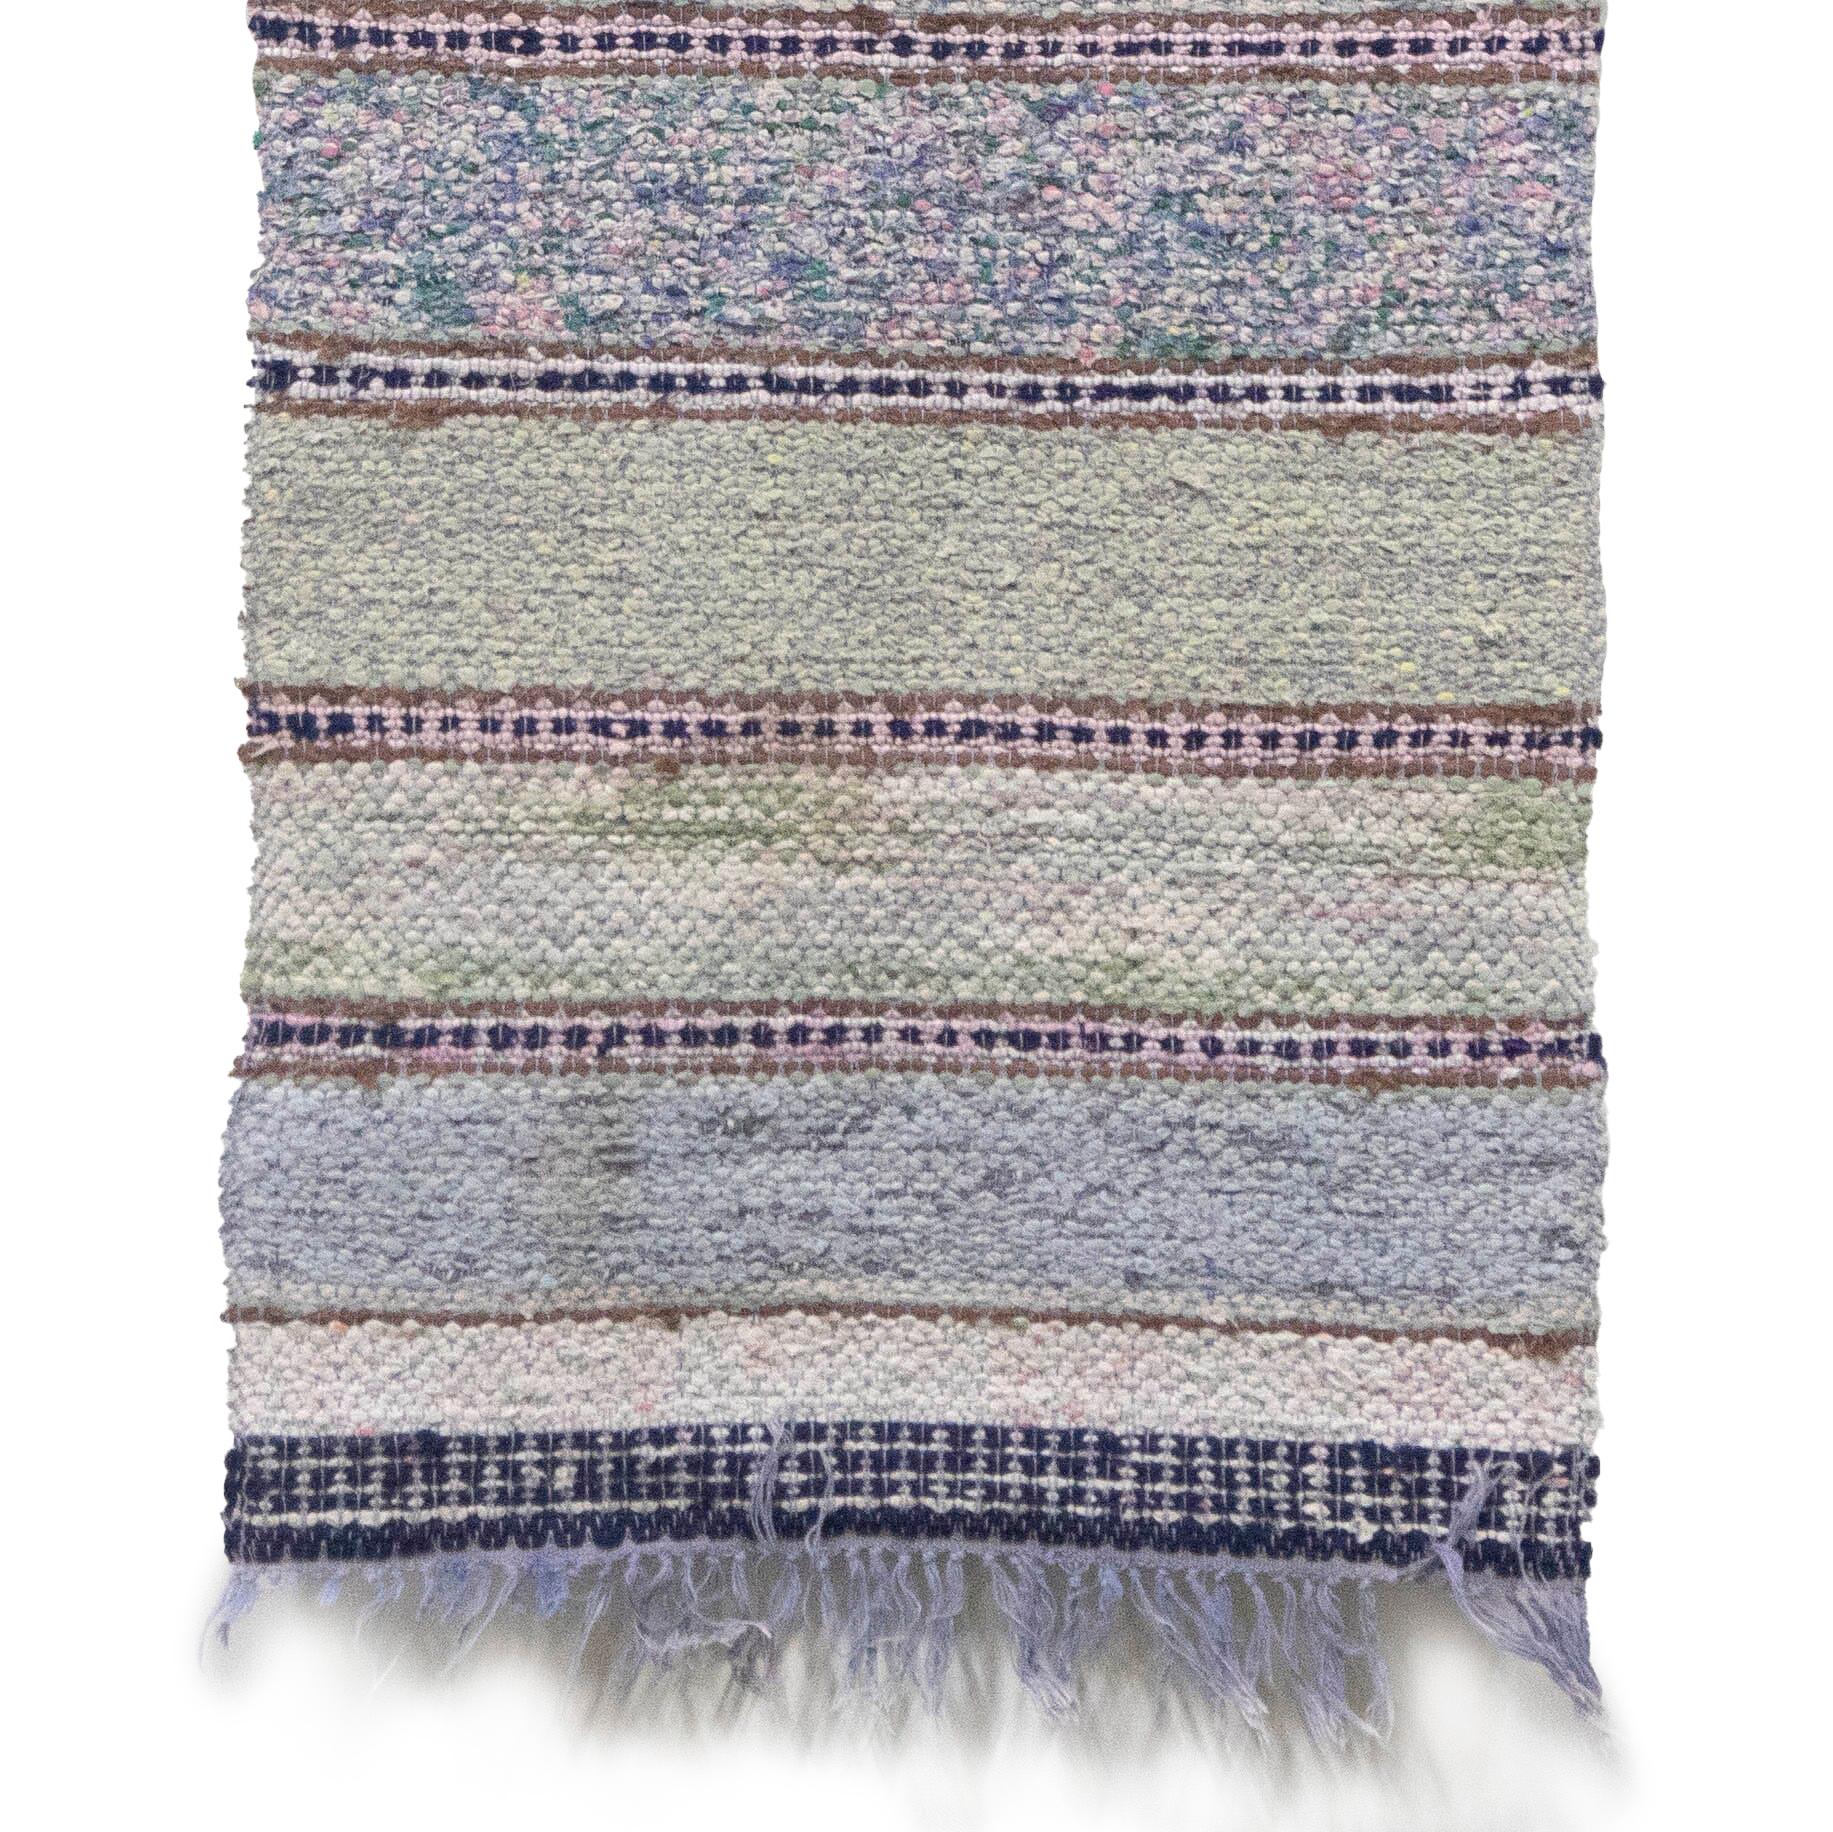 20th century Swedish rag rug. Featuring a stripe design in tones of blue and green. This rug is machine washable at 30 degrees.
RT6024602